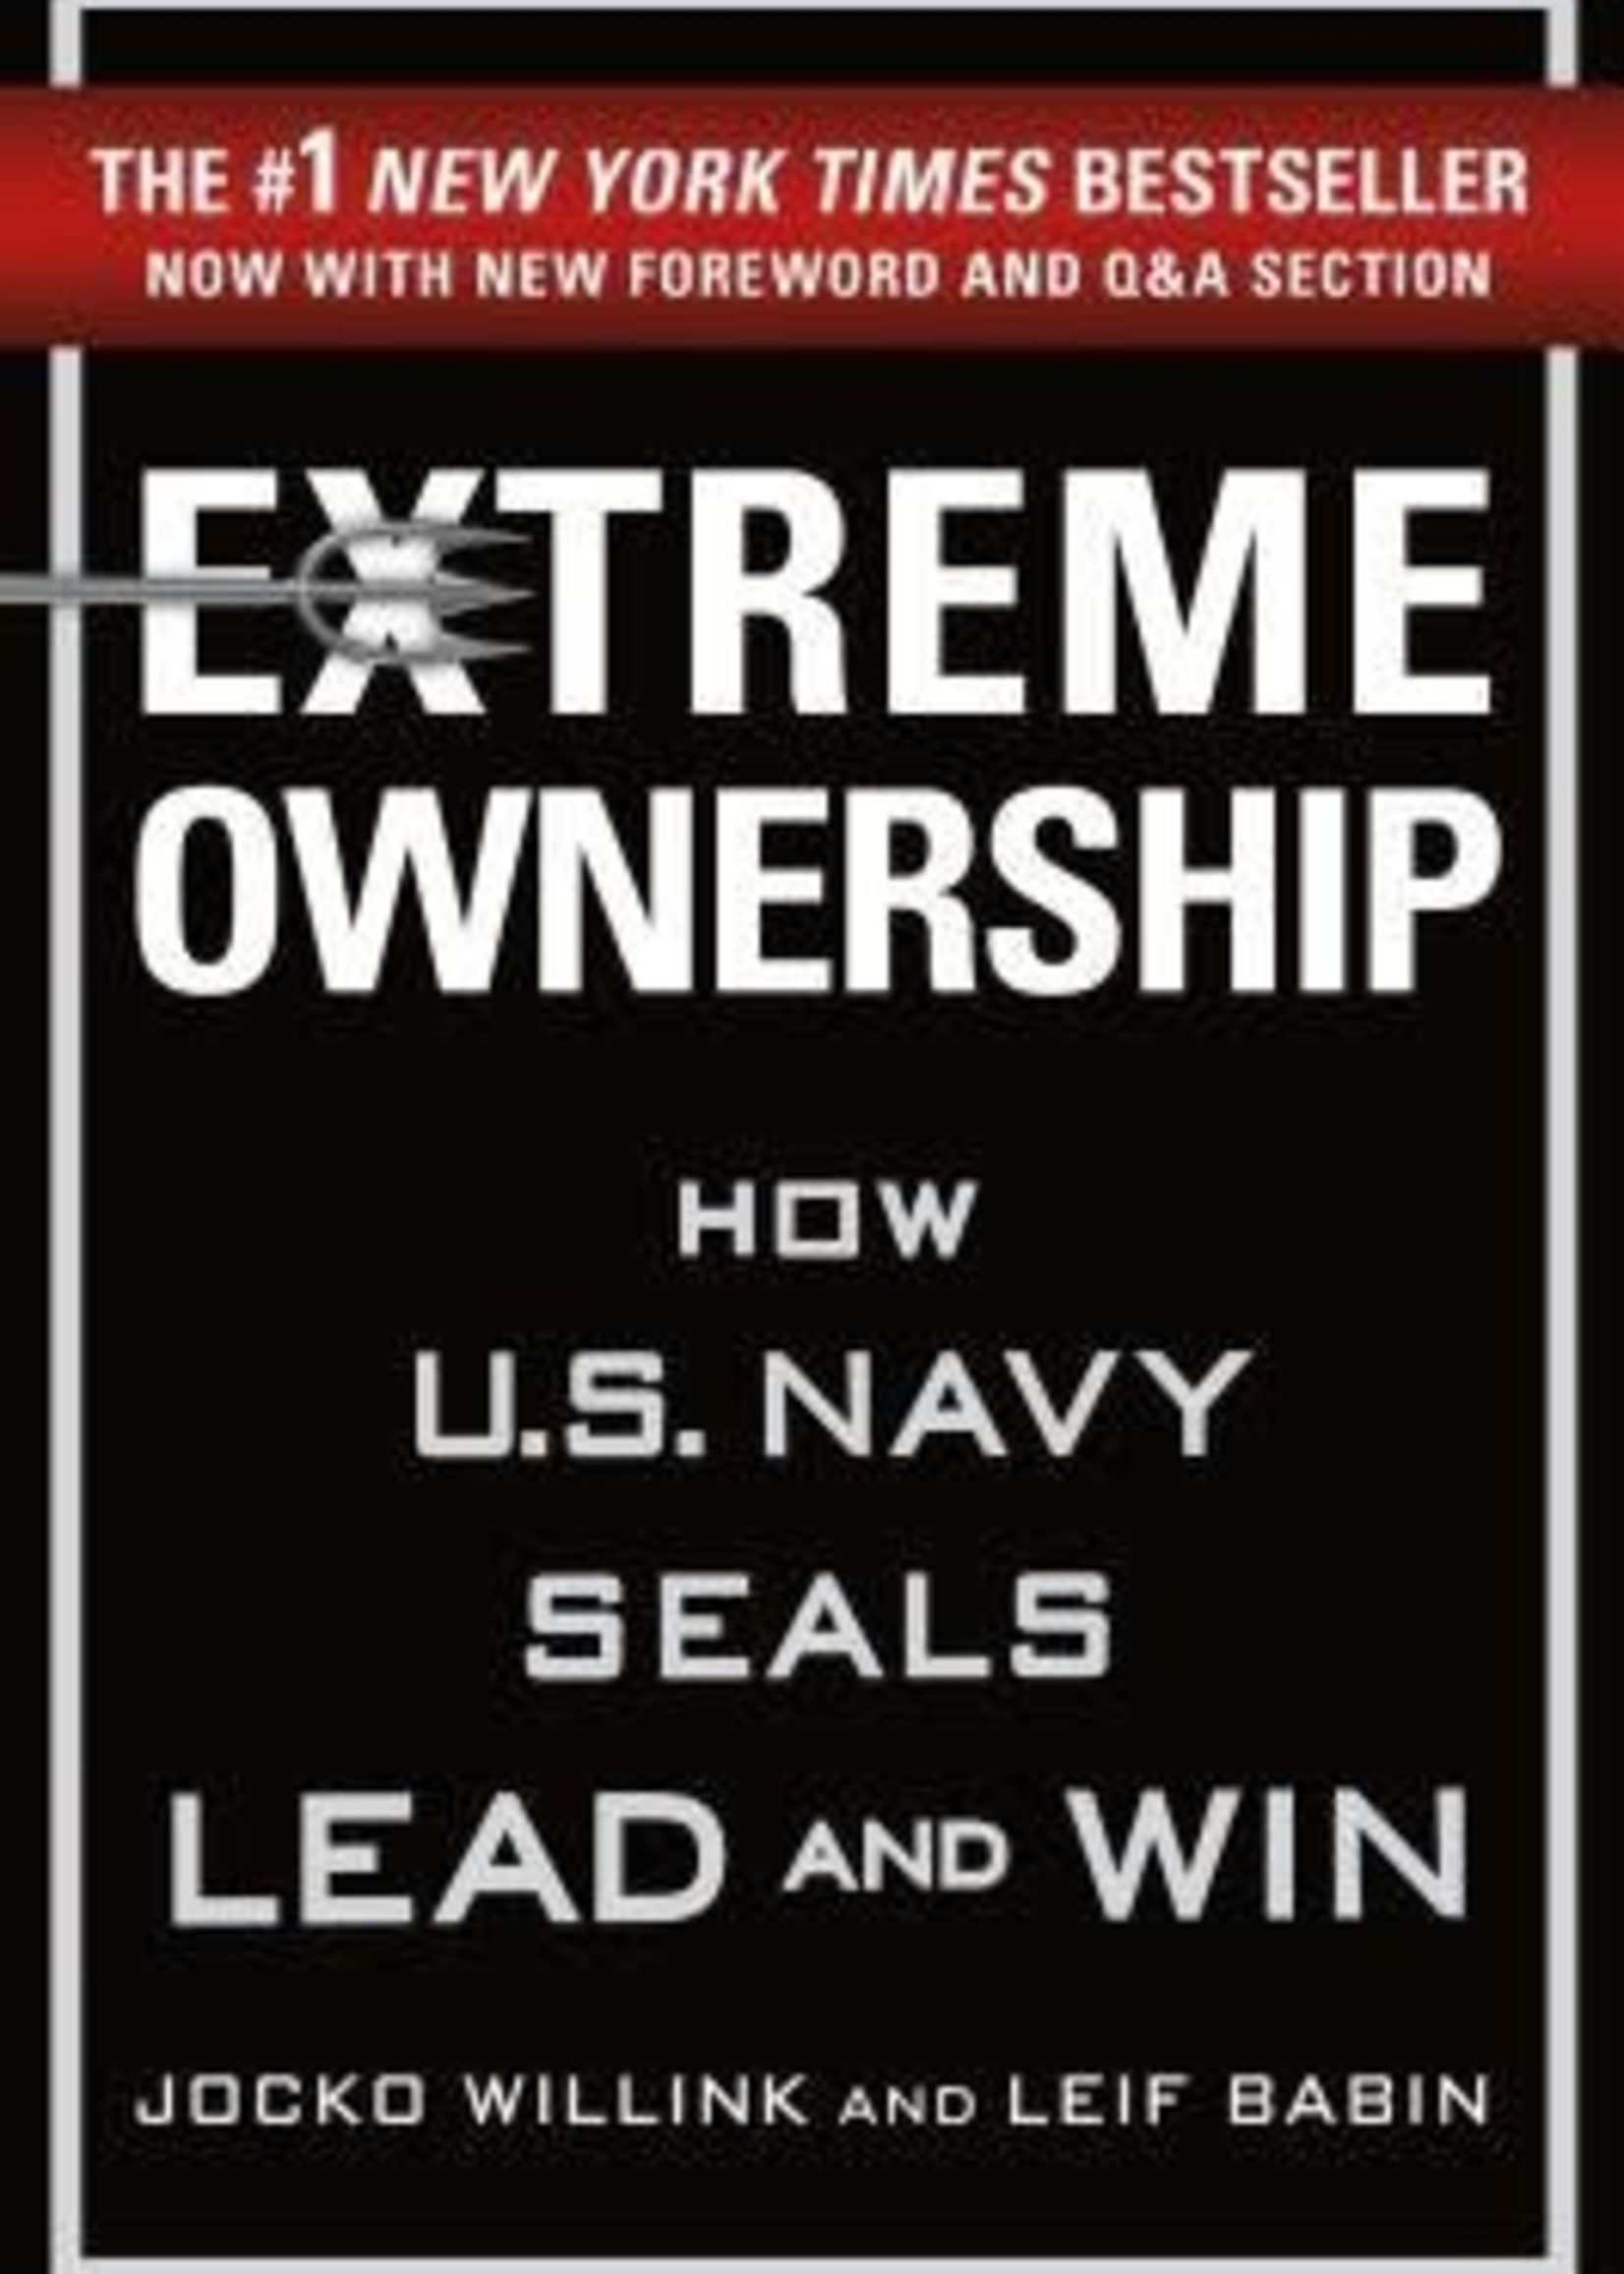 Extreme Ownership: How U.S. Navy Seals Lead and Win by Jocko Willink